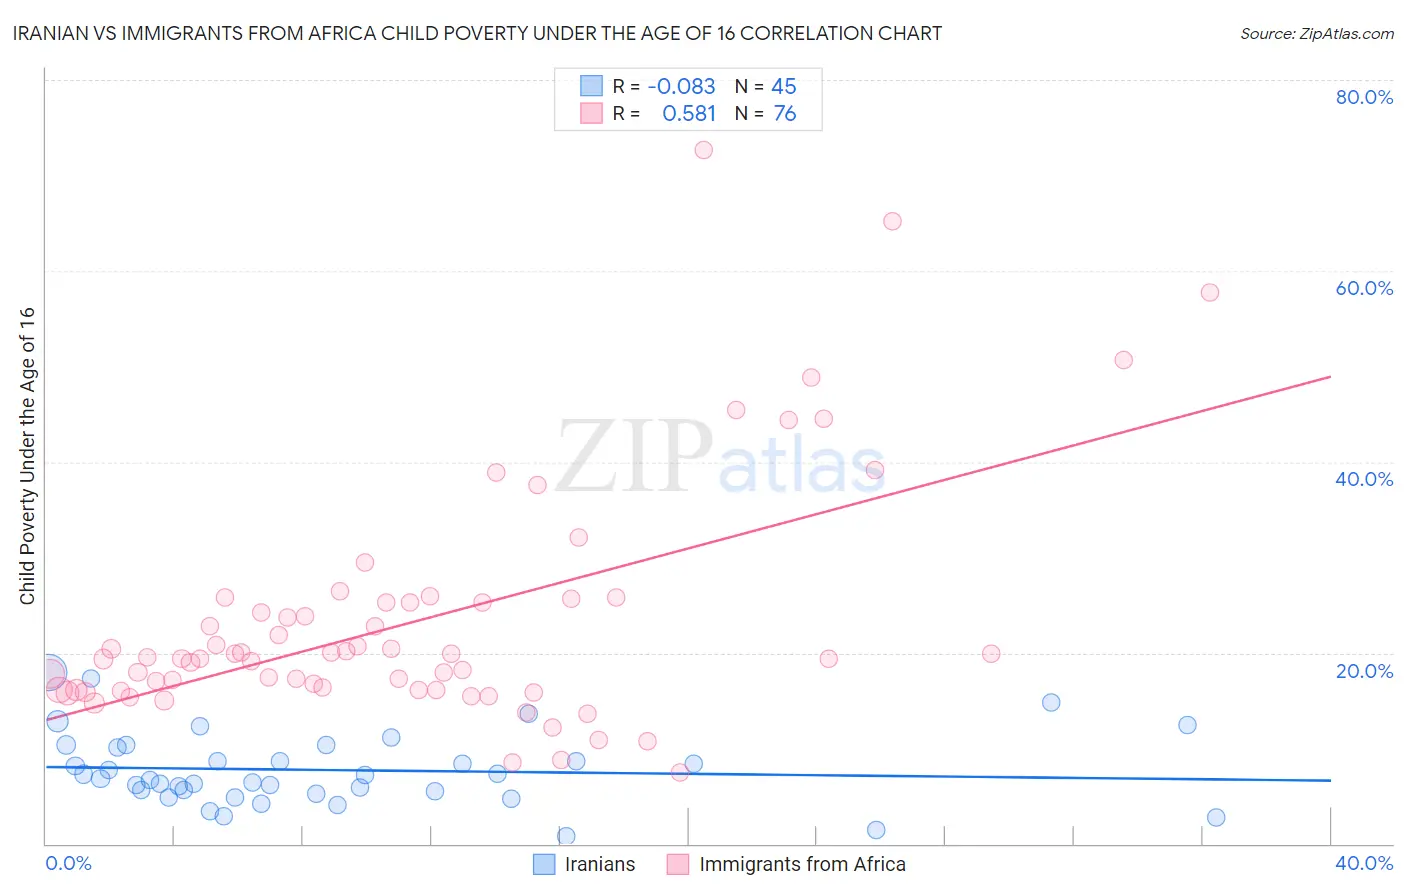 Iranian vs Immigrants from Africa Child Poverty Under the Age of 16